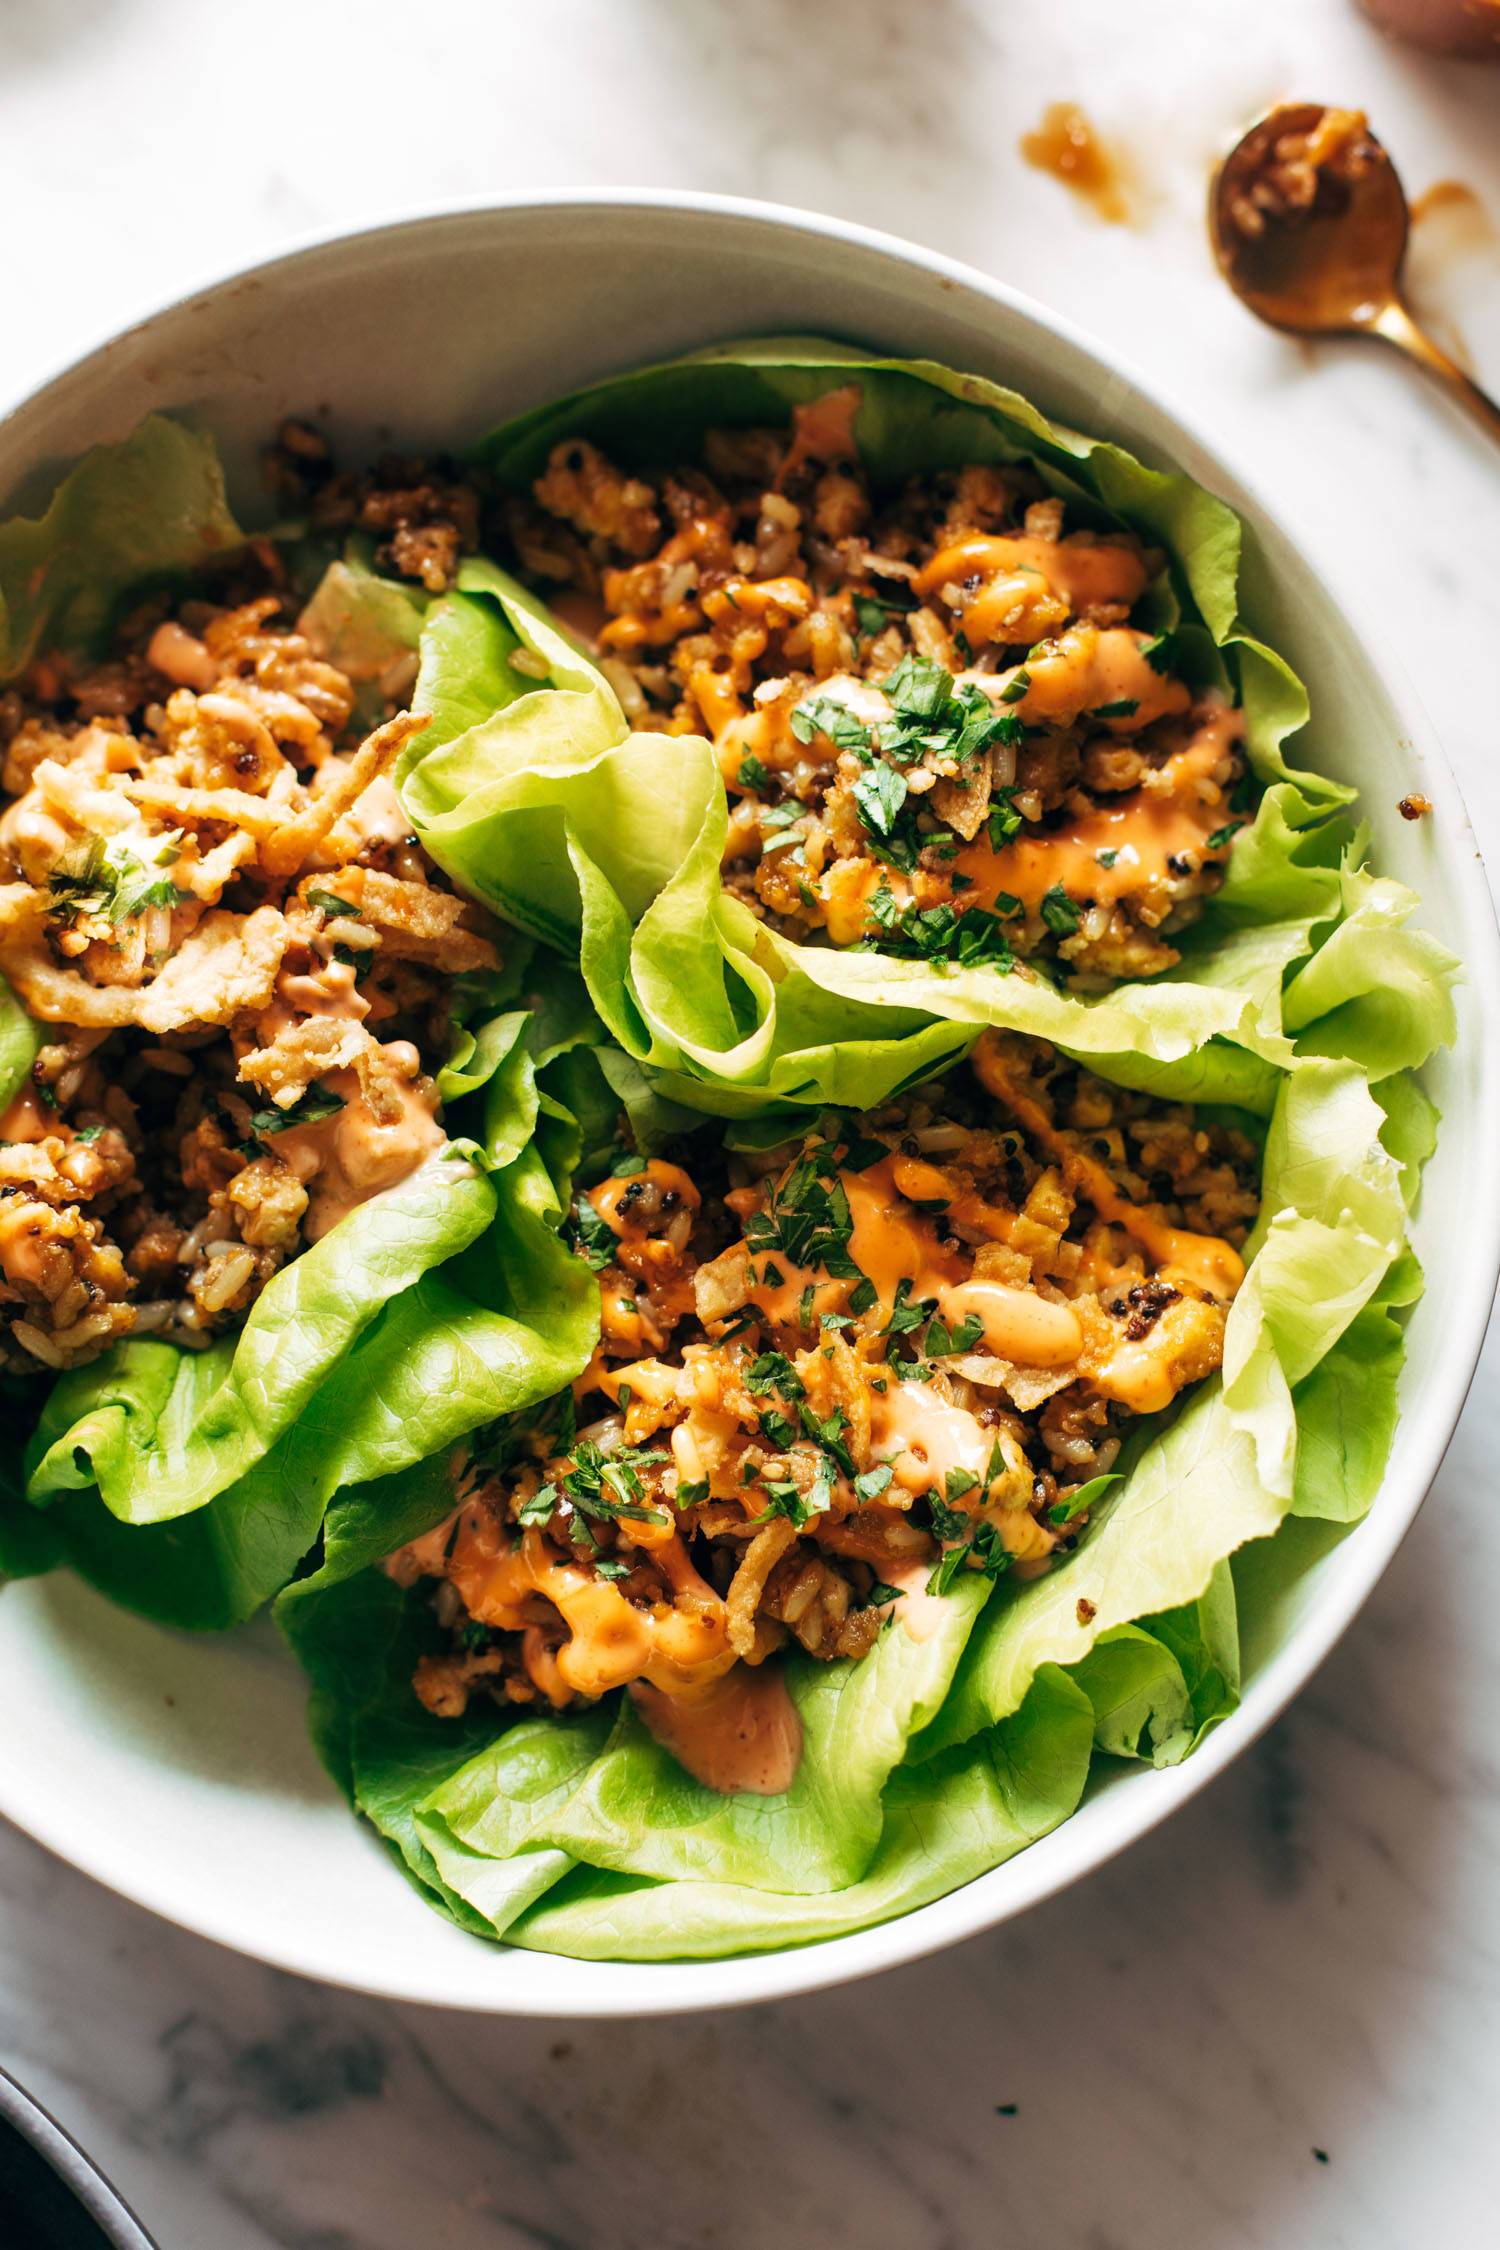 Lettuce wraps on a plate. The wraps are filled with tofu and brown rice and have sauce drizzled on top.